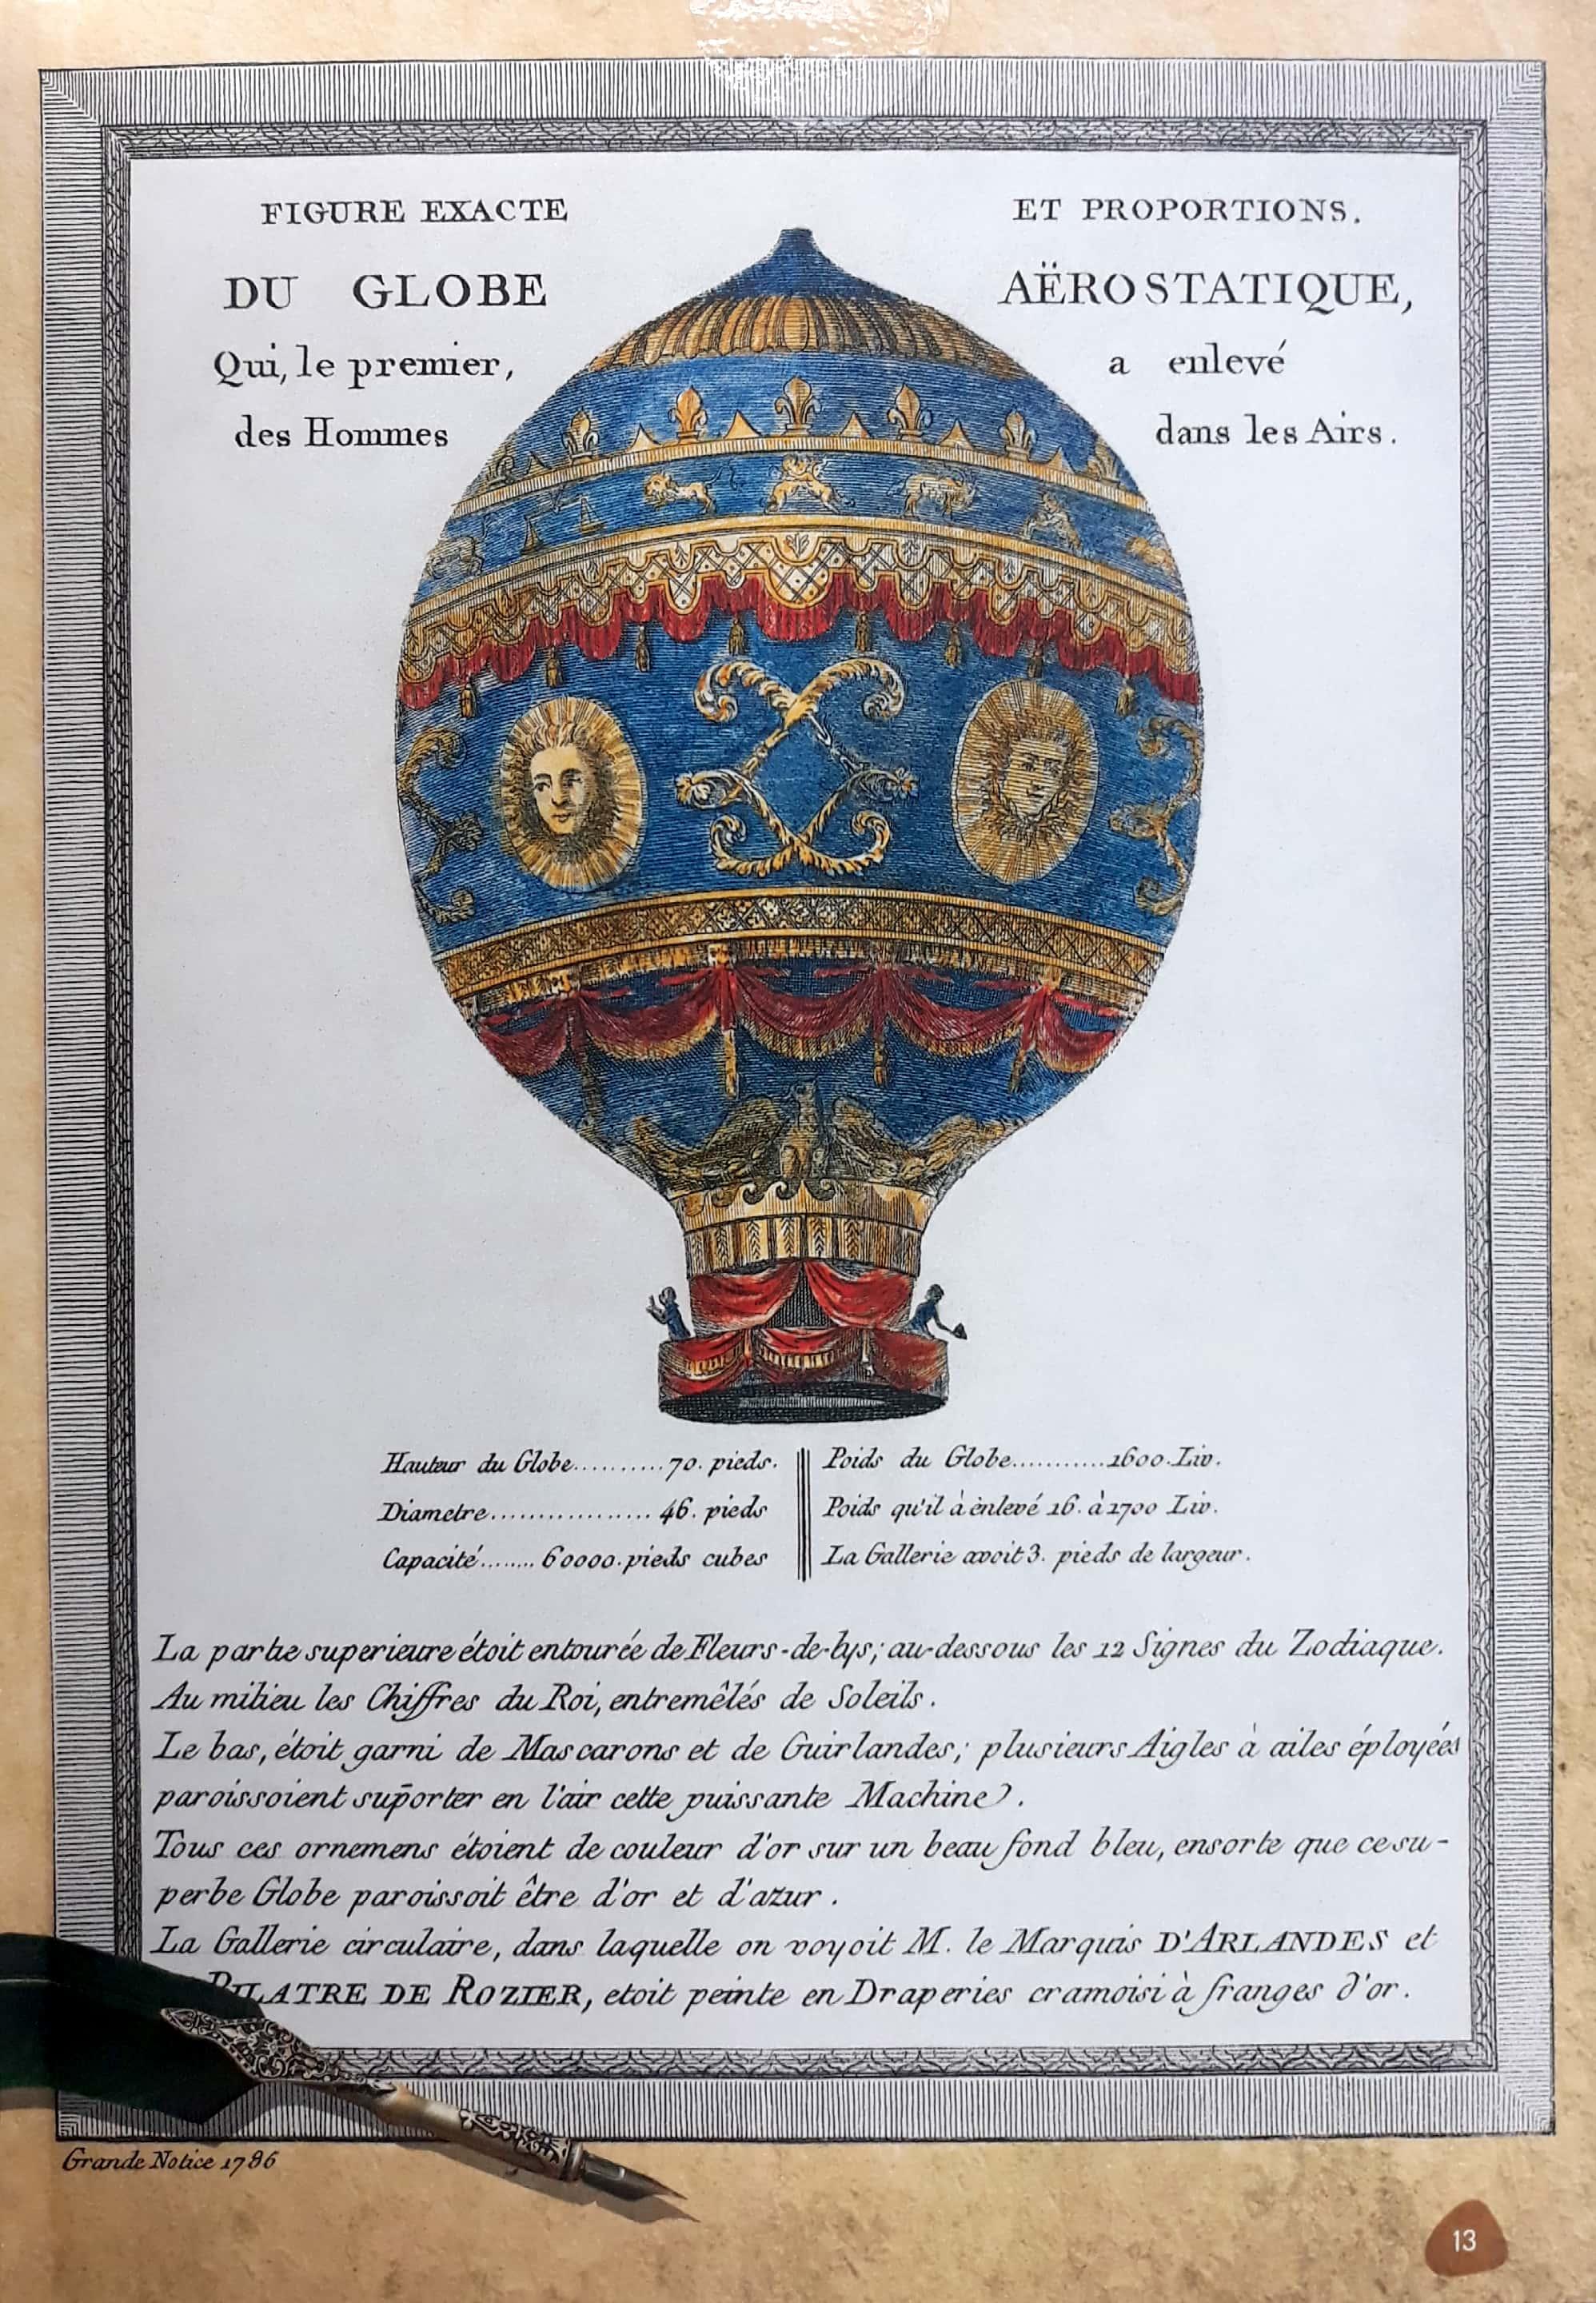 Montgolfier Brothers: 1783 Hot Air Balloon (Scientists &amp; Inventors)